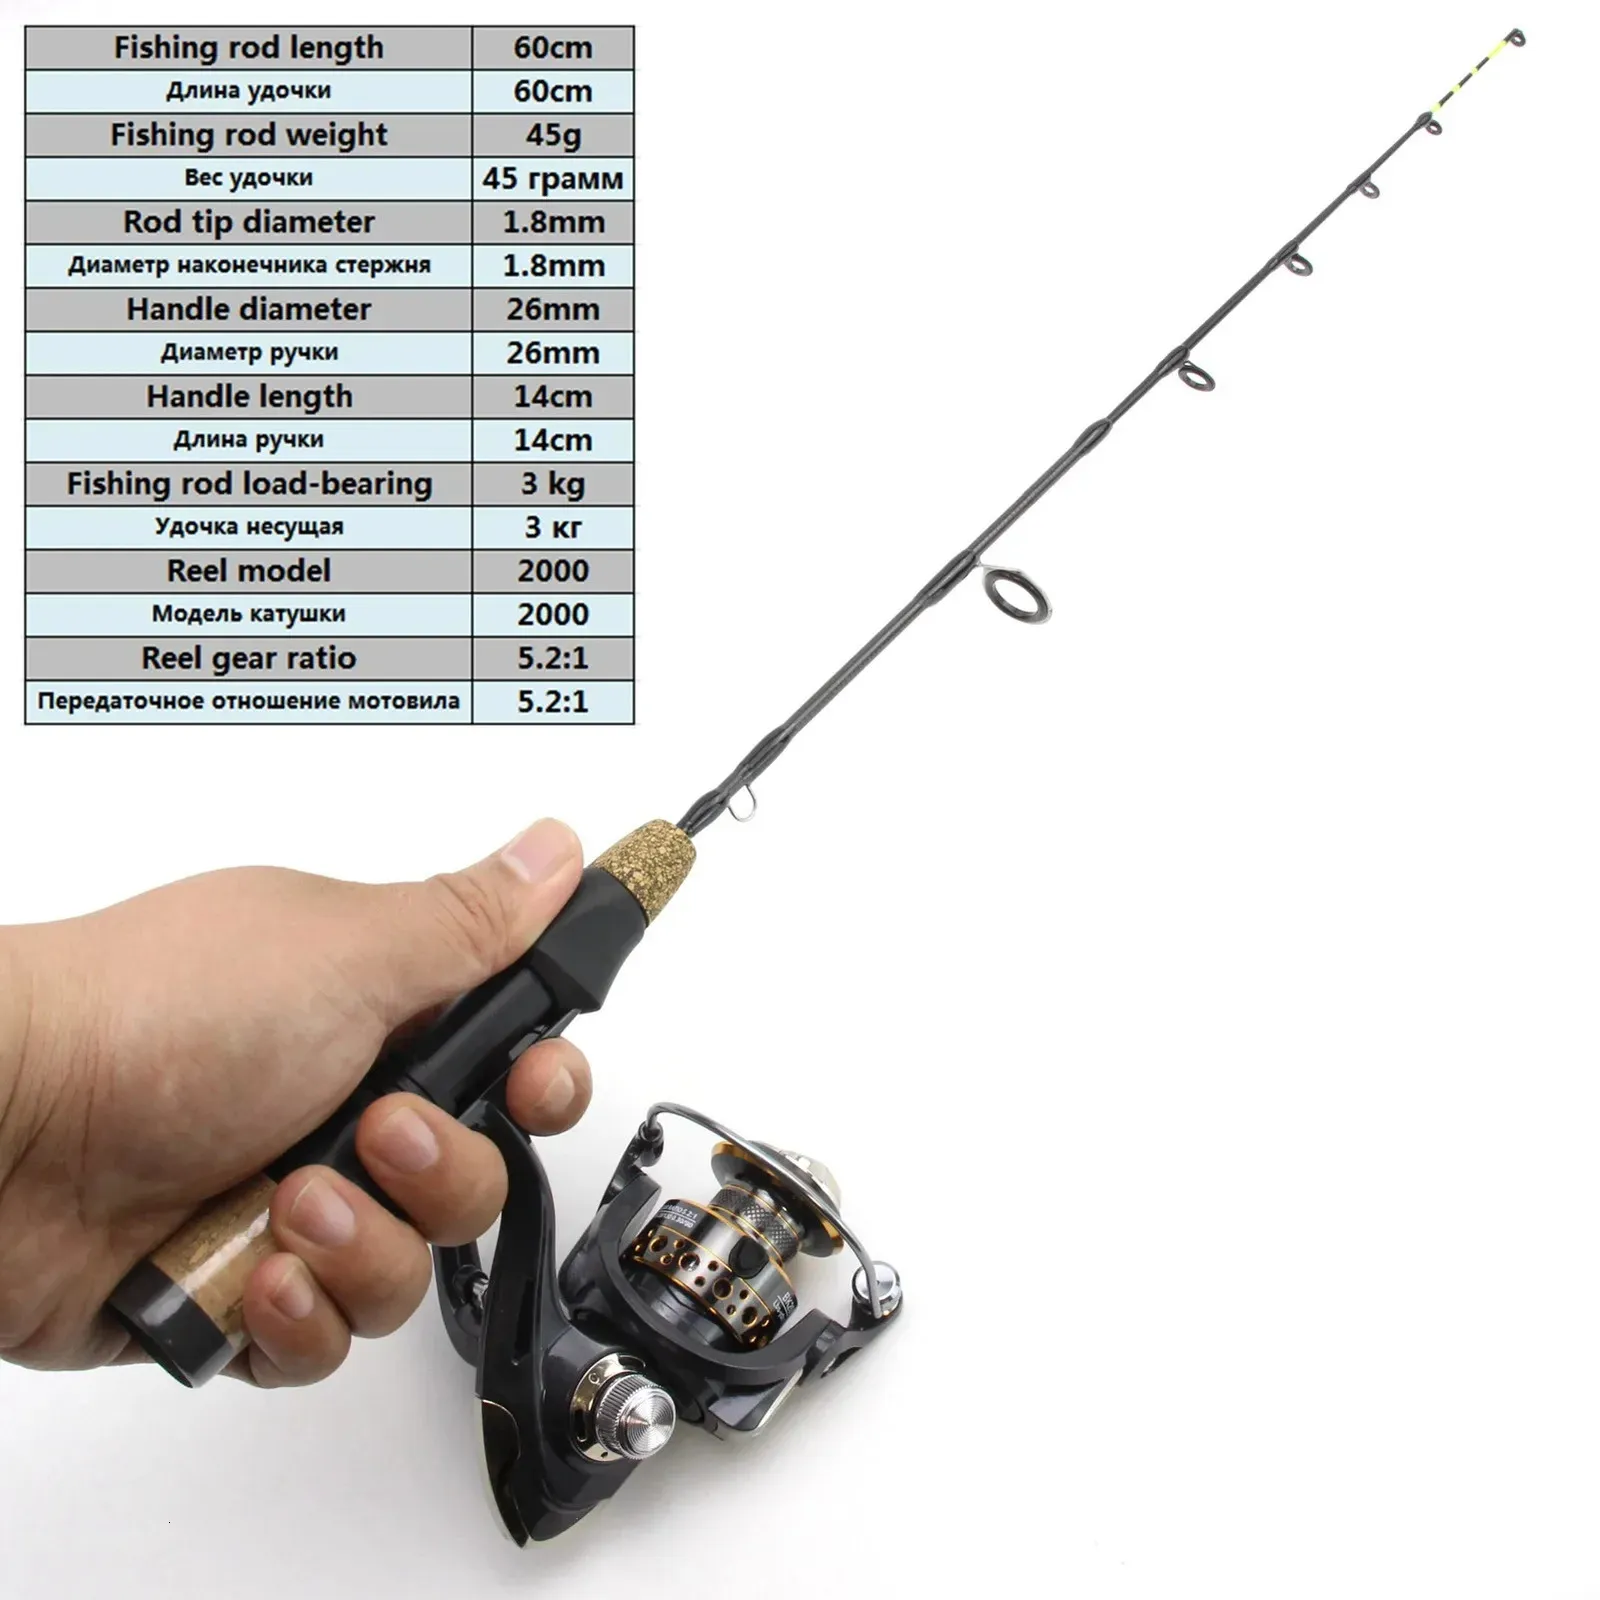 IceFisher Carbon Fiber Reel: 60cm Lightweight Folding River/Shrimp Fishing  Pole With Winter Tackle Set From Chao07, $12.33